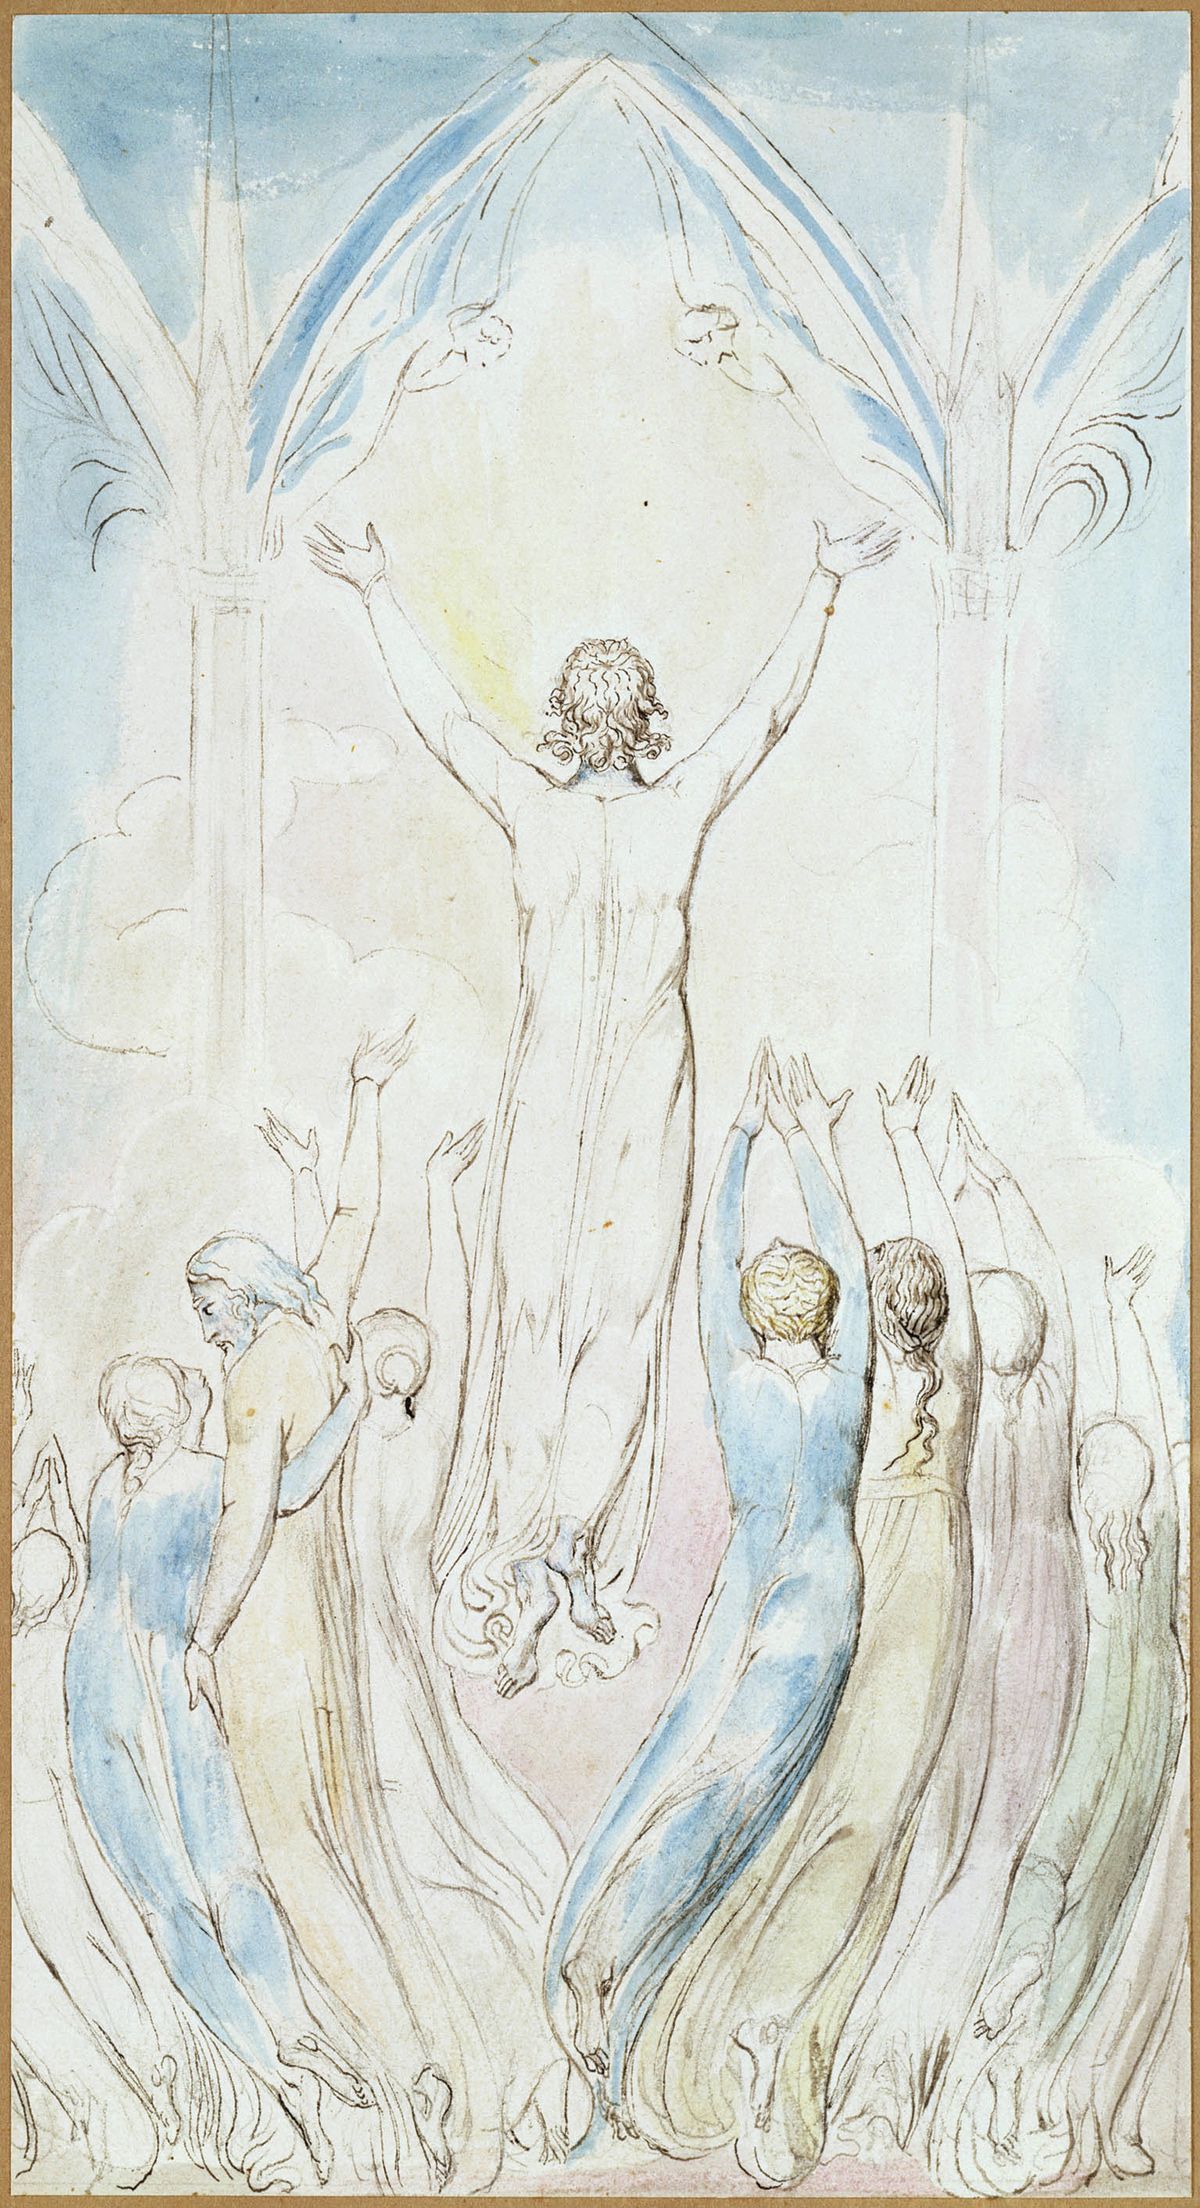 Heaven’s Portals Wide Expand to Let Him In—one of the rediscovered 19 illustrations made by William Blake in 1805 collection of robert n. essick